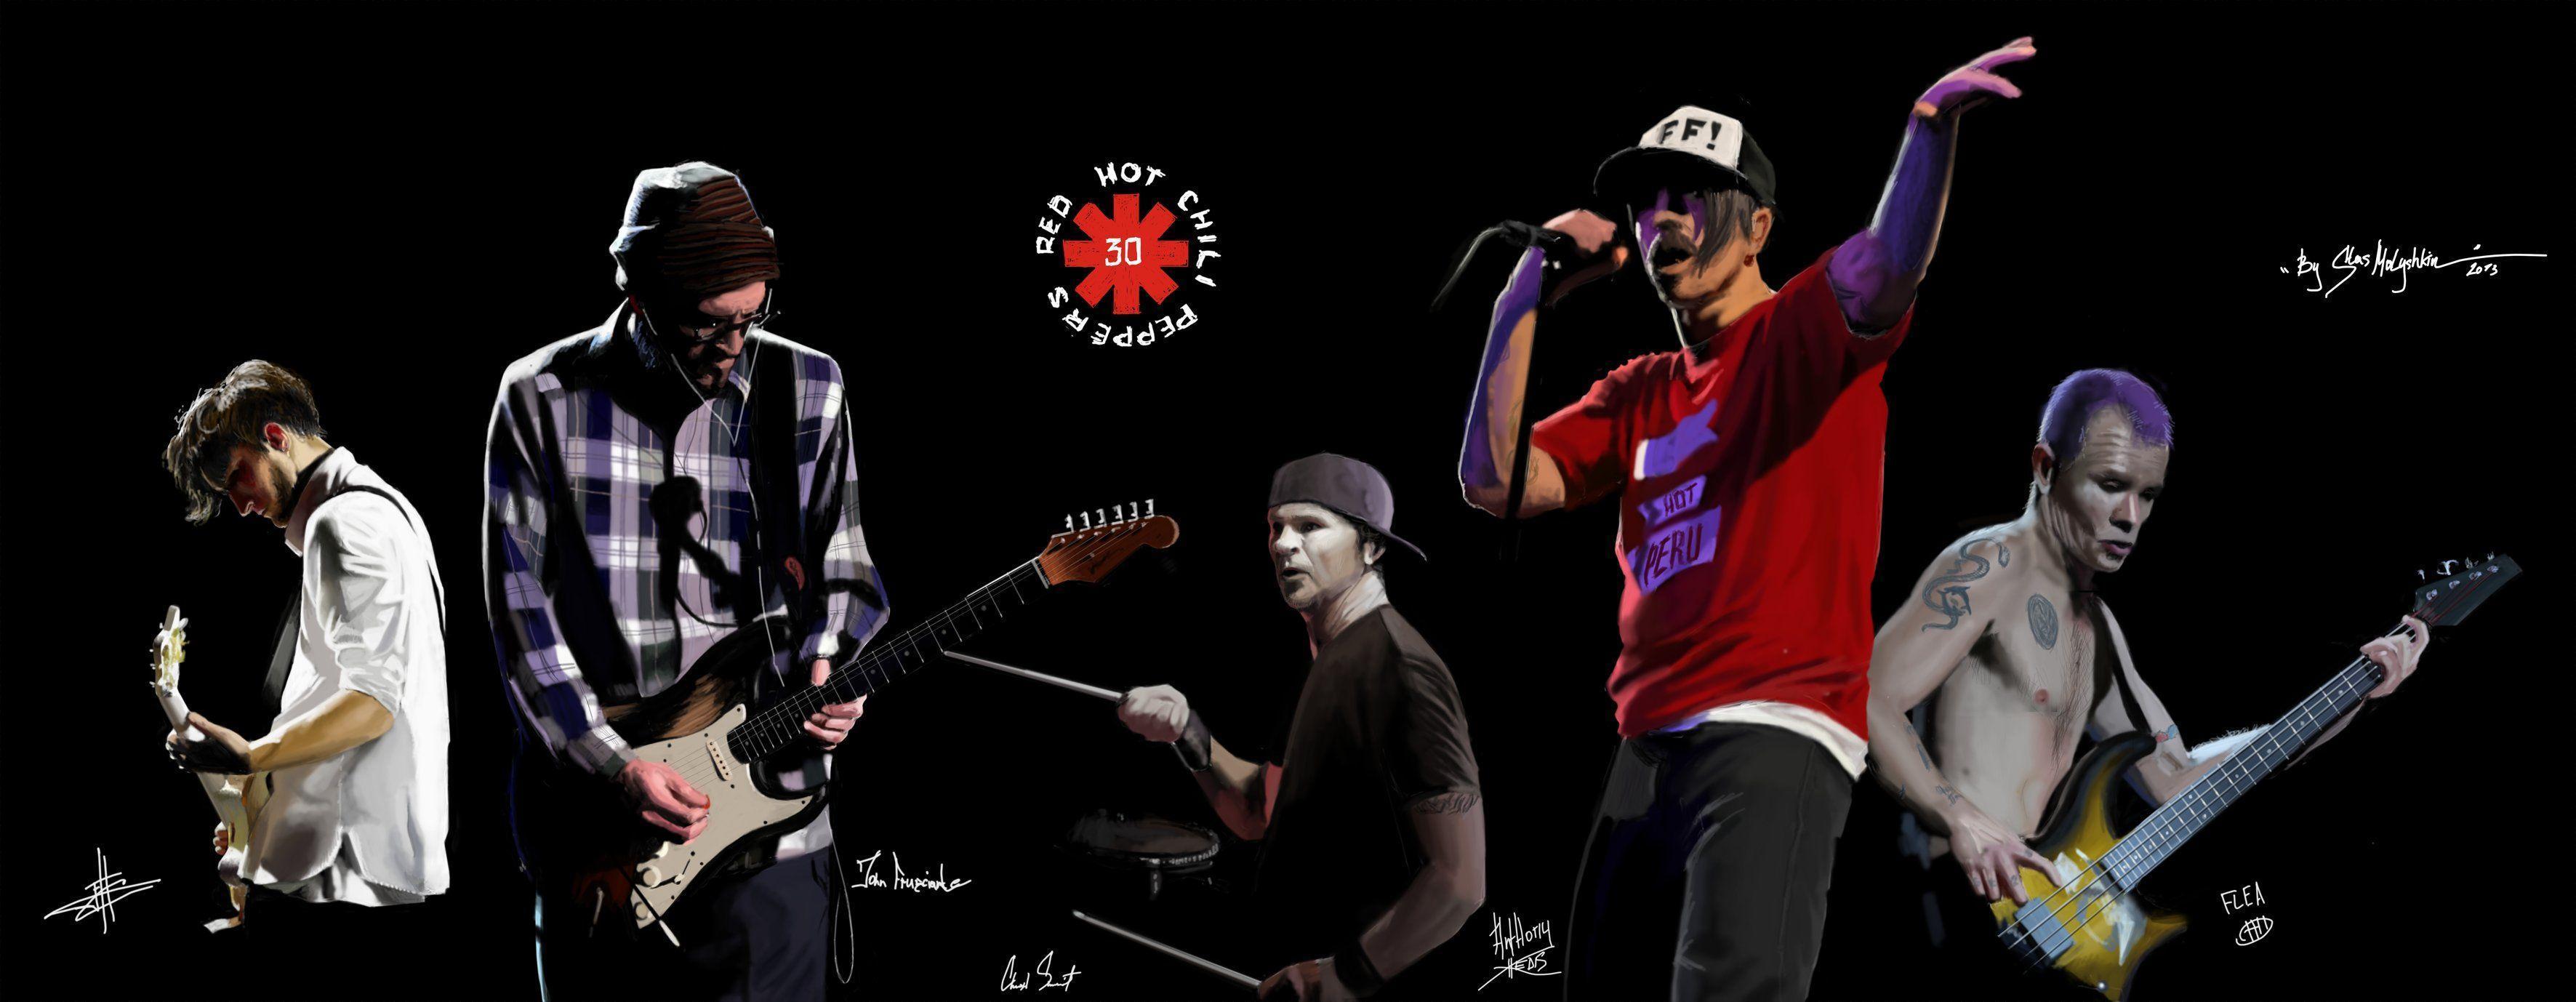 Red Hot Chili Peppers  Wallpaper  HD Wallpapers  WallHere